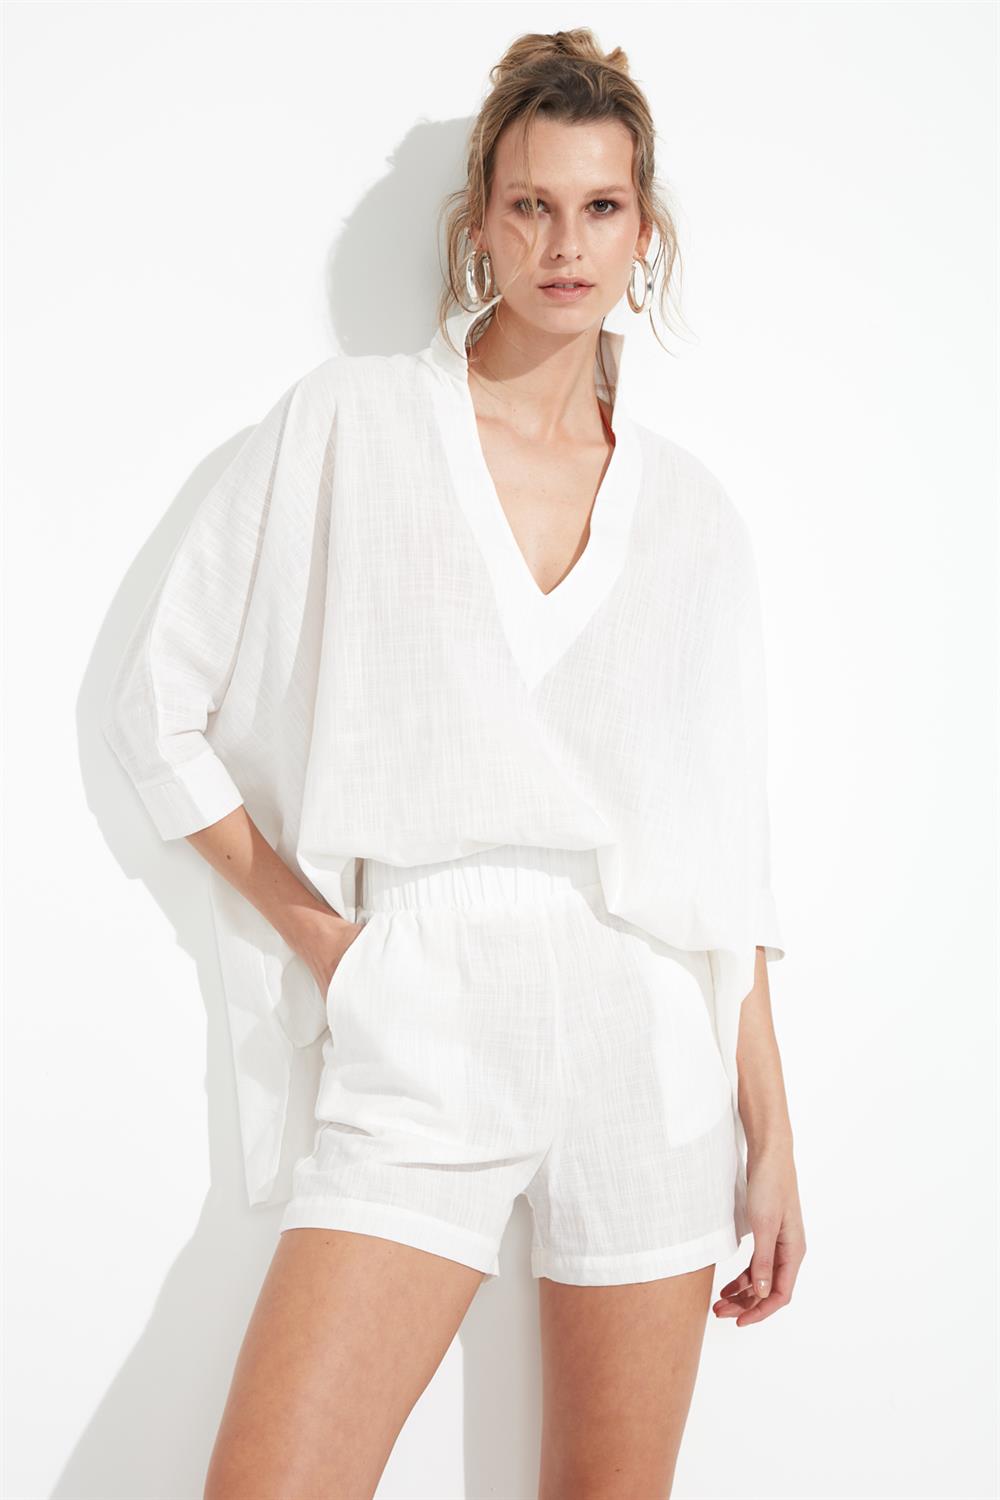 Less Is More Morocco Short LM21503 White